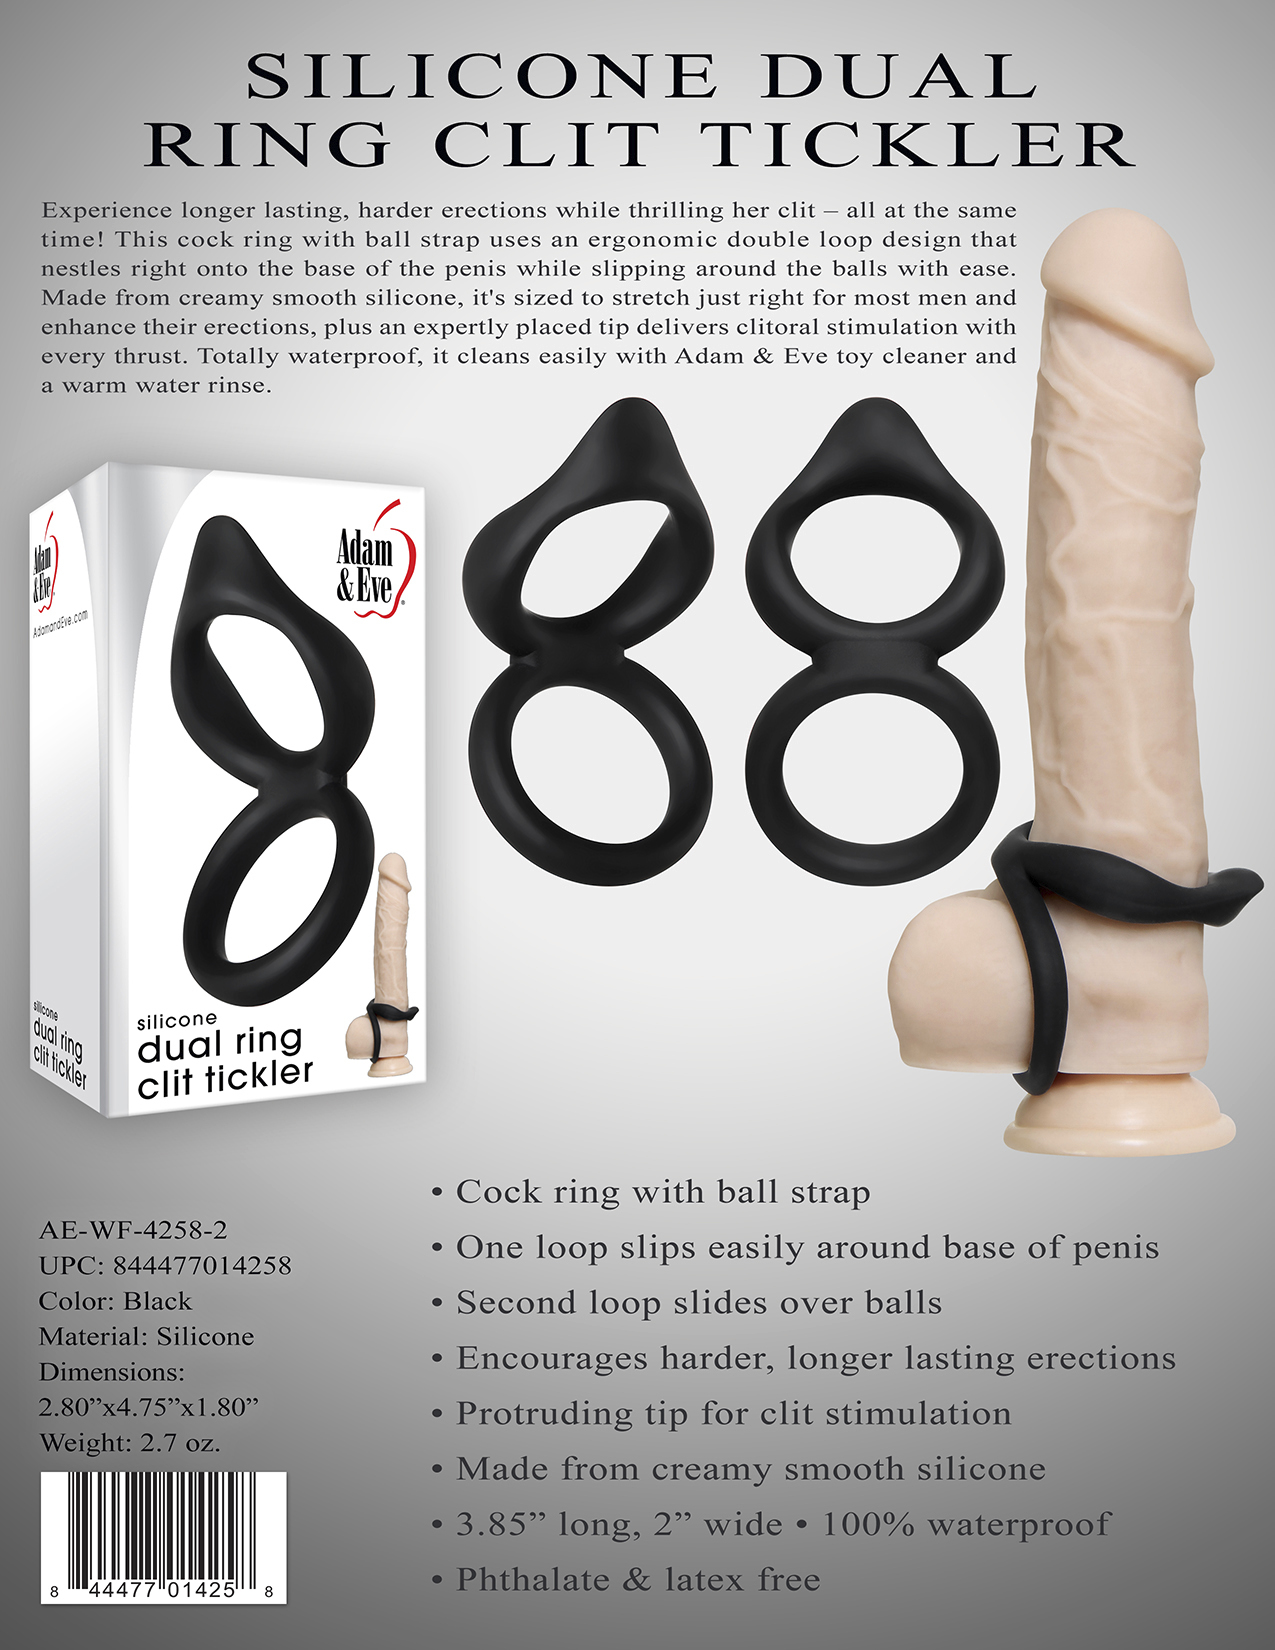 SILICONE-DUAL-RING-CLIT-TICKLER-back.jpg